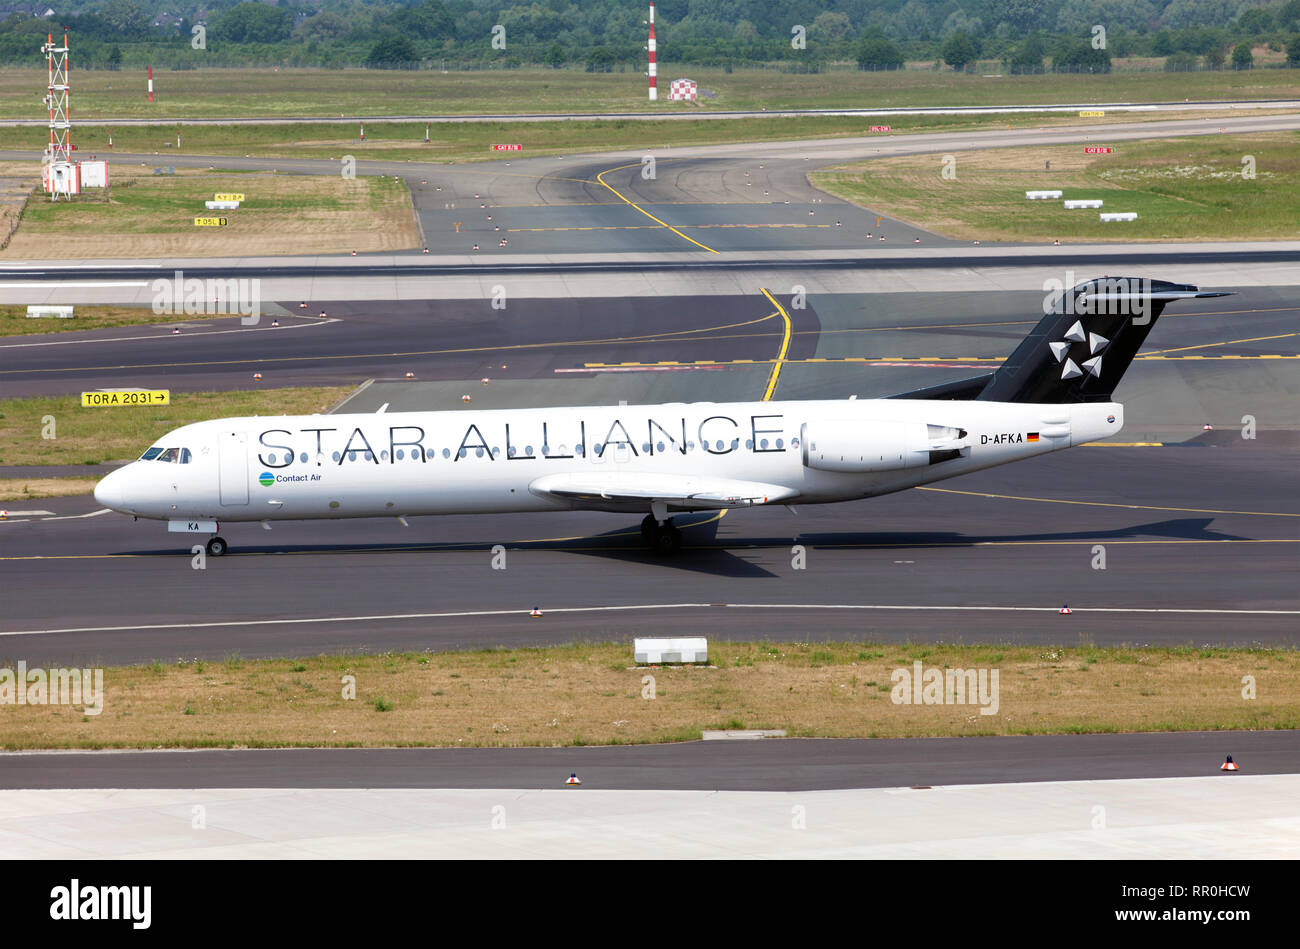 Passenger aircraft Fokker 100 of Contact Air airline is part of the Lufthansa Regional airlines makes a run before takeoff Stock Photo